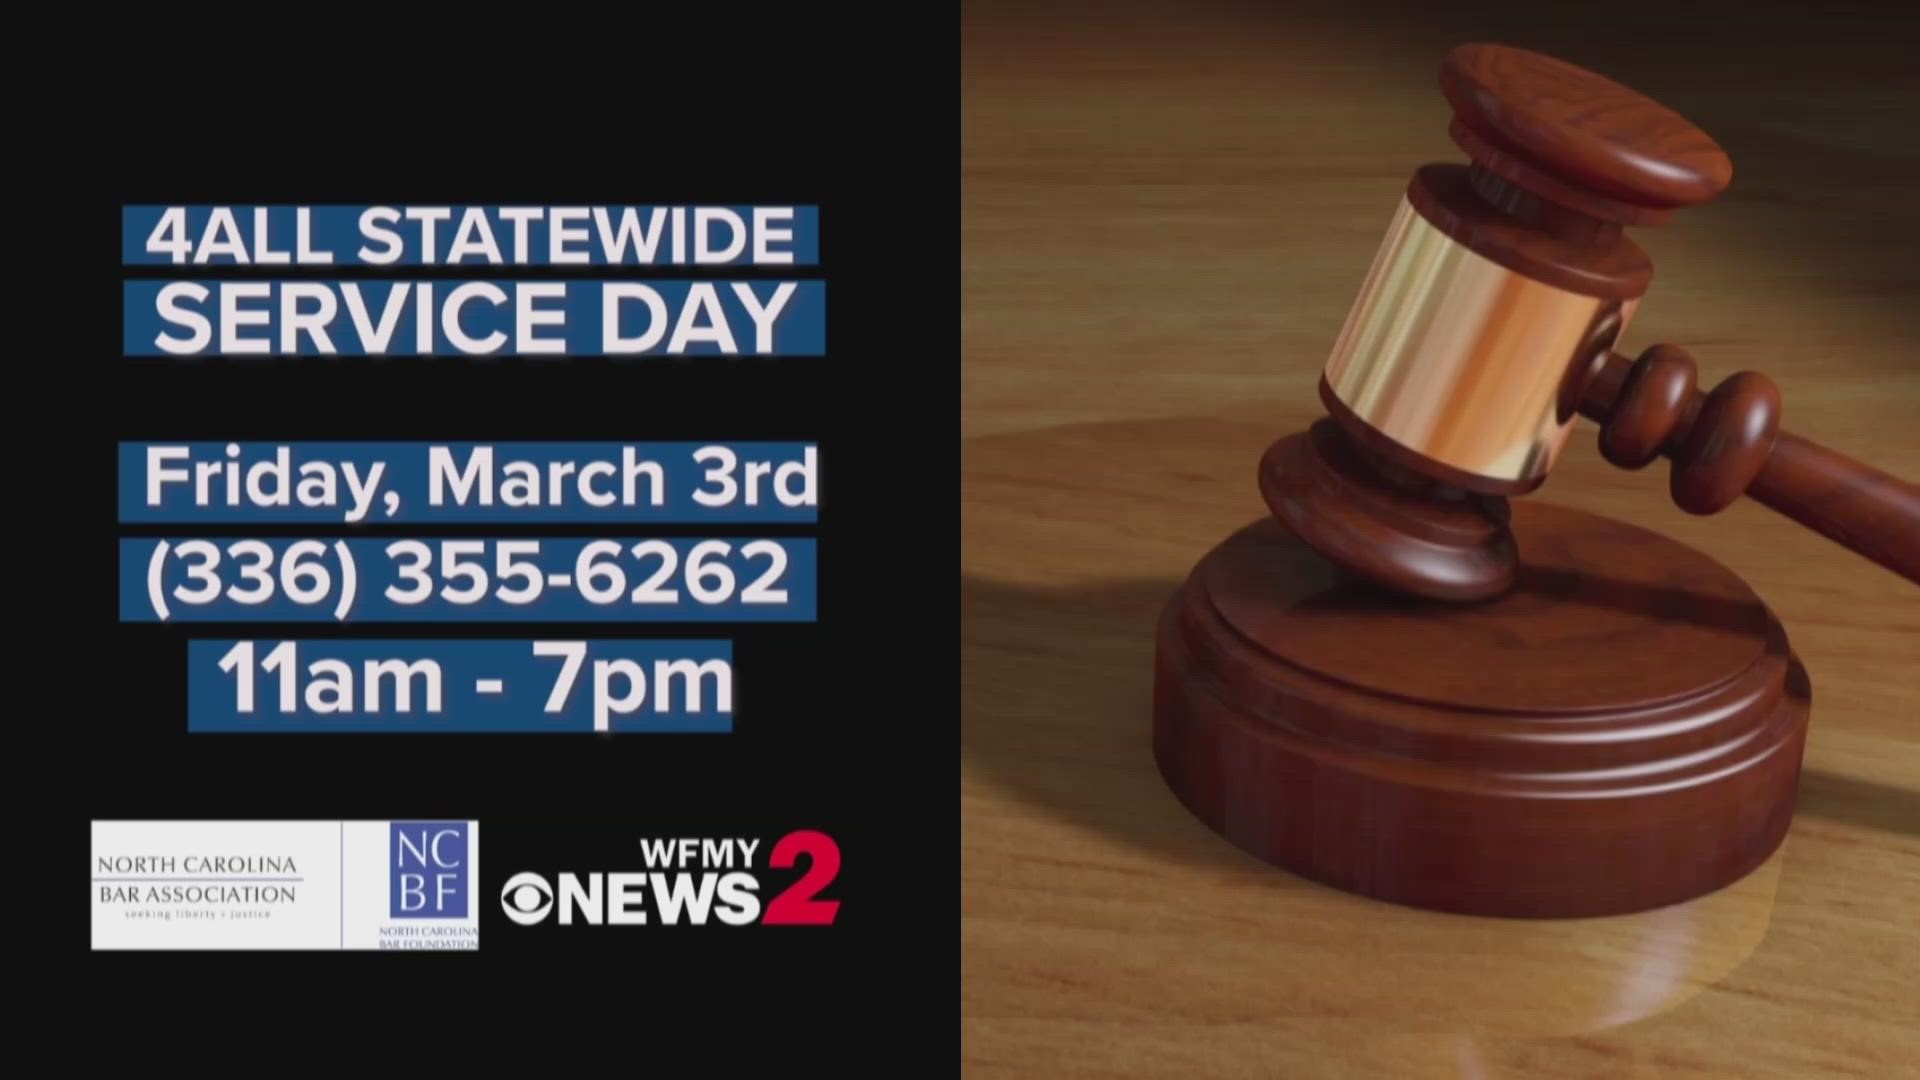 Every year, the North Carolina Bar Association and Foundation participates in the free call-in event – 4ALL Service Day. One of the topics? Wills and estates.